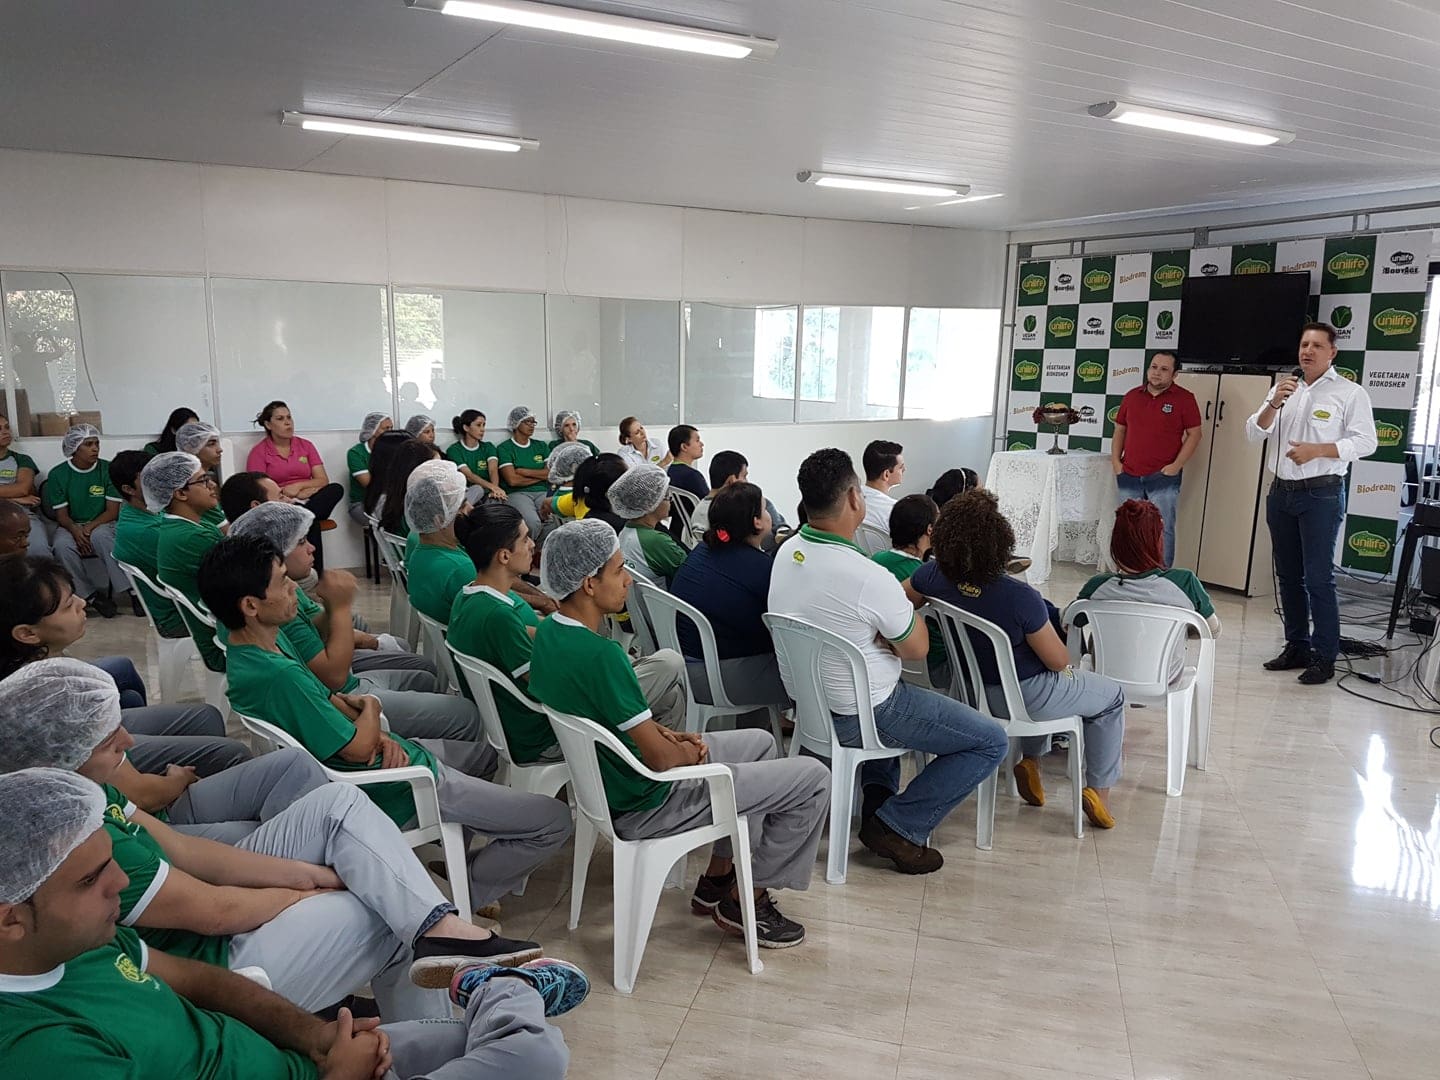 Unilife workers met every day at the factory meeting room during Easter Week to listen to spiritual messages by a local Seventh-day Adventist pastor. [Photo by SAD News Agency]